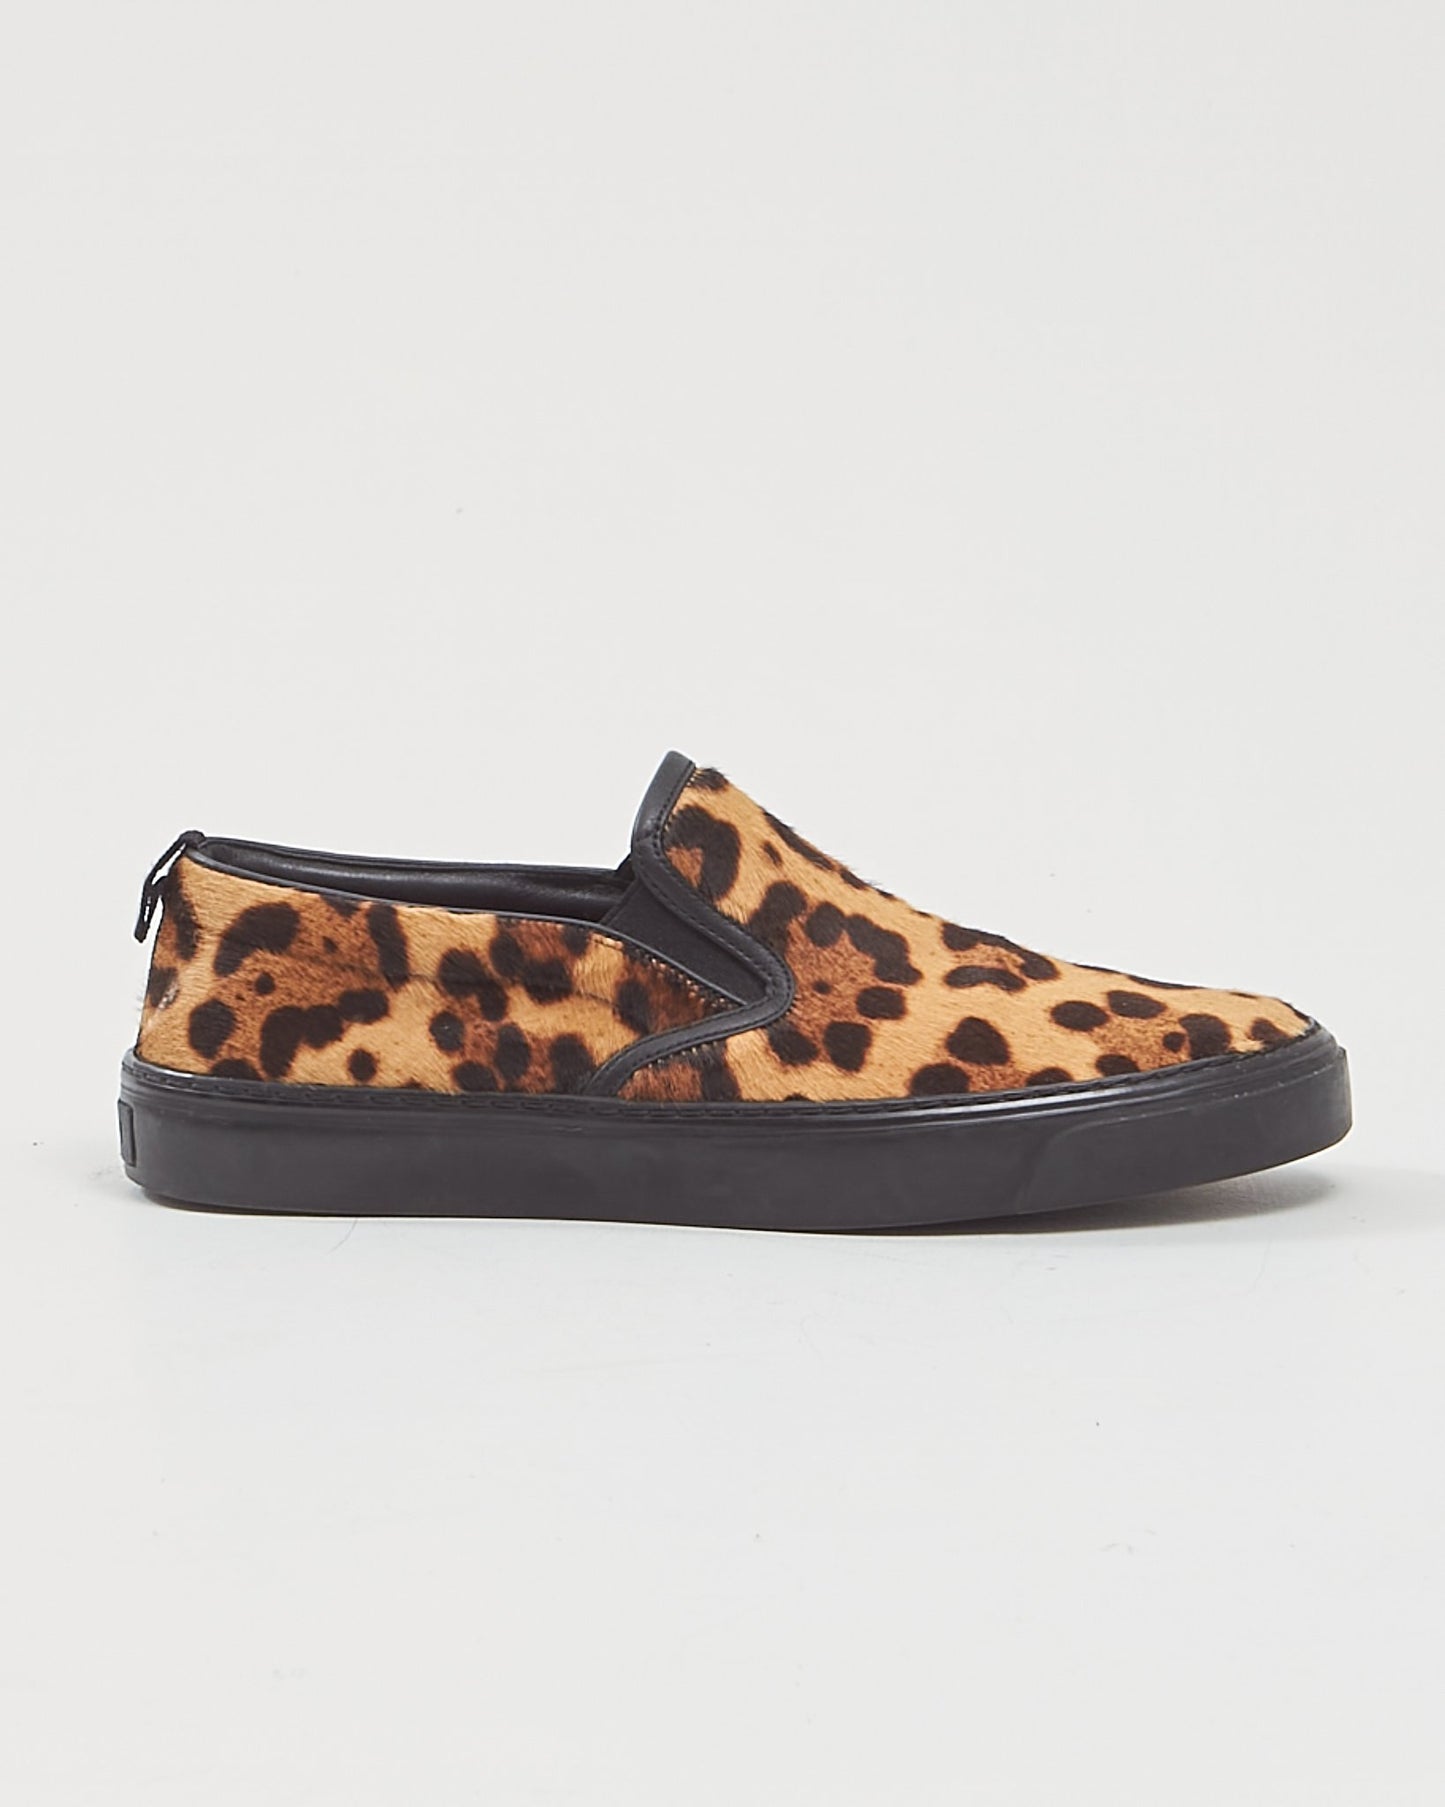 Gucci Leopard Loafers - 37.5